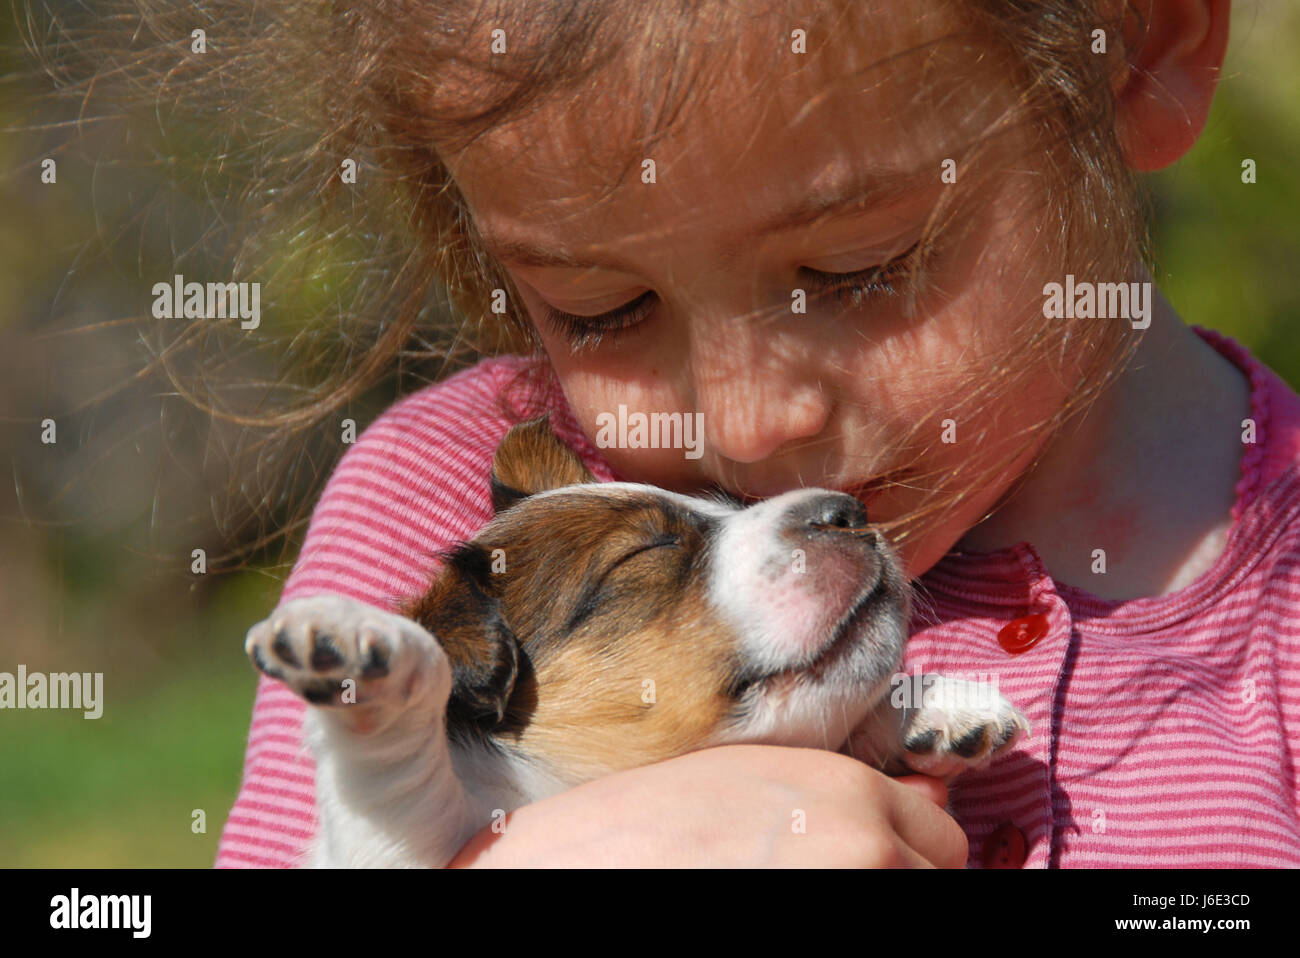 pet jack puppy clicking terrier journal box child animal small tiny little Stock Photo